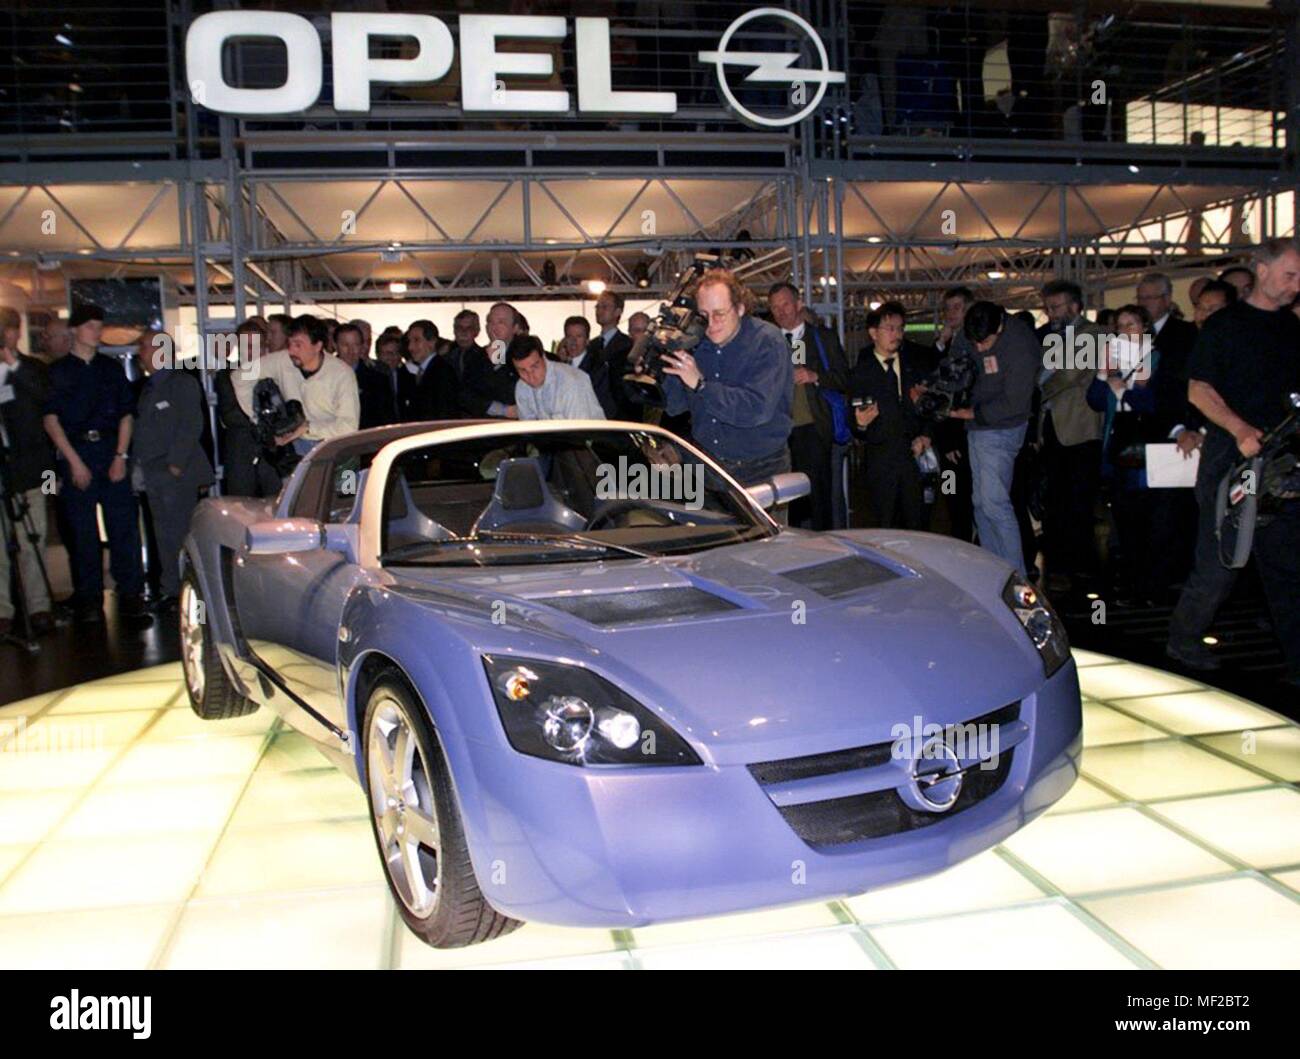 On the occasion of the 100th anniversary of the company, Opel will be  presenting a Speedster study at the Geneva Motor Show on March 9, 1999. The  sports car is powered by